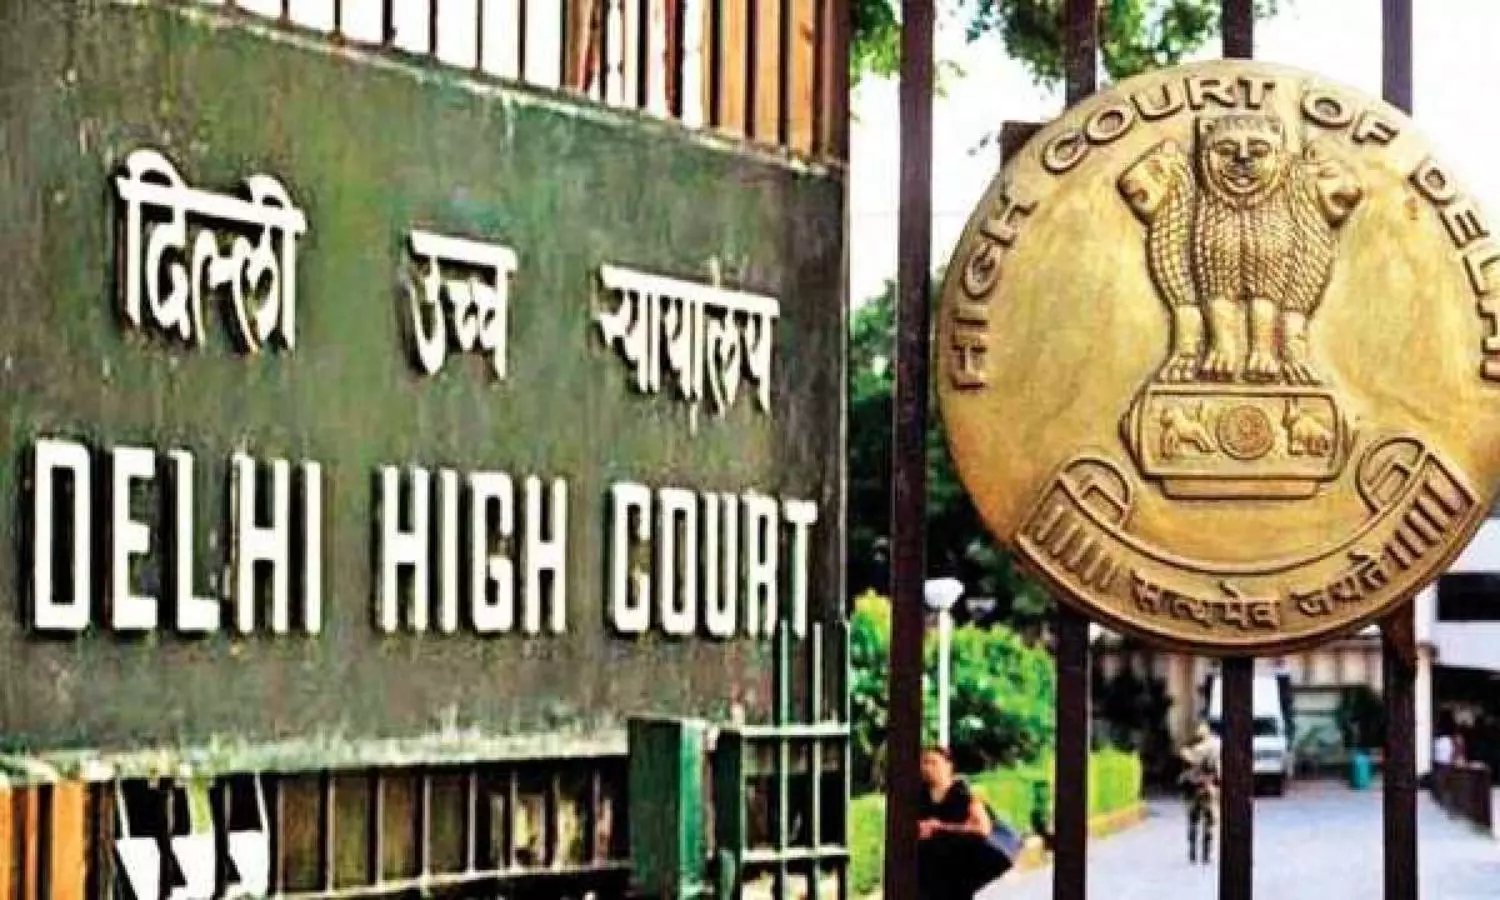 Can NEET candidates with low benchmark disability get MBBS admission against vacant seats? Delhi HC asks Centre to decide